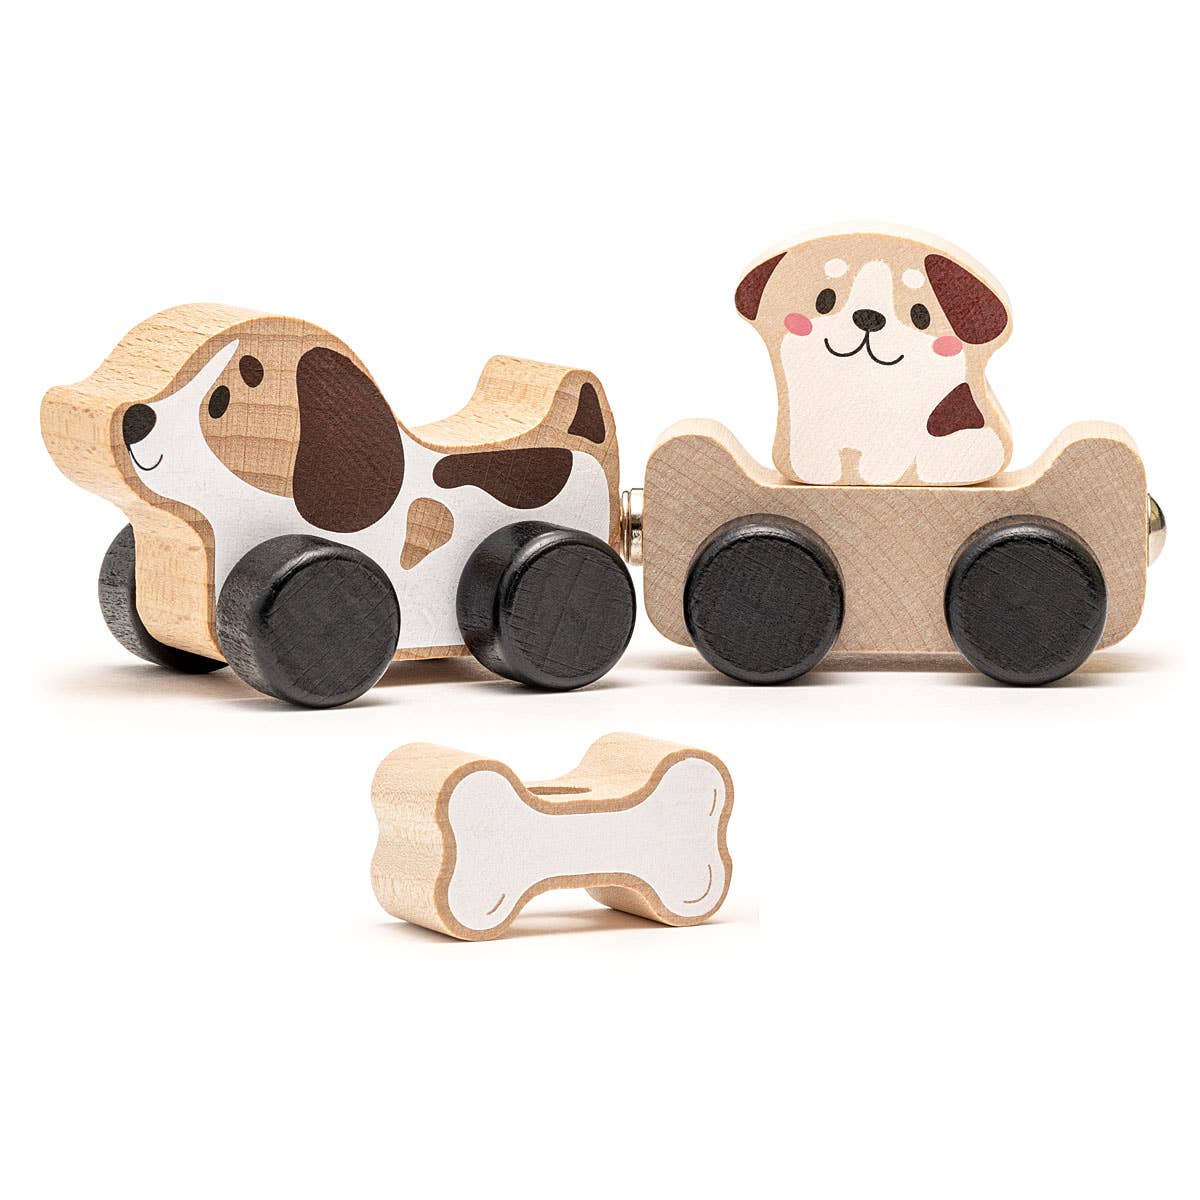 Wooden toy | Clever Puppies